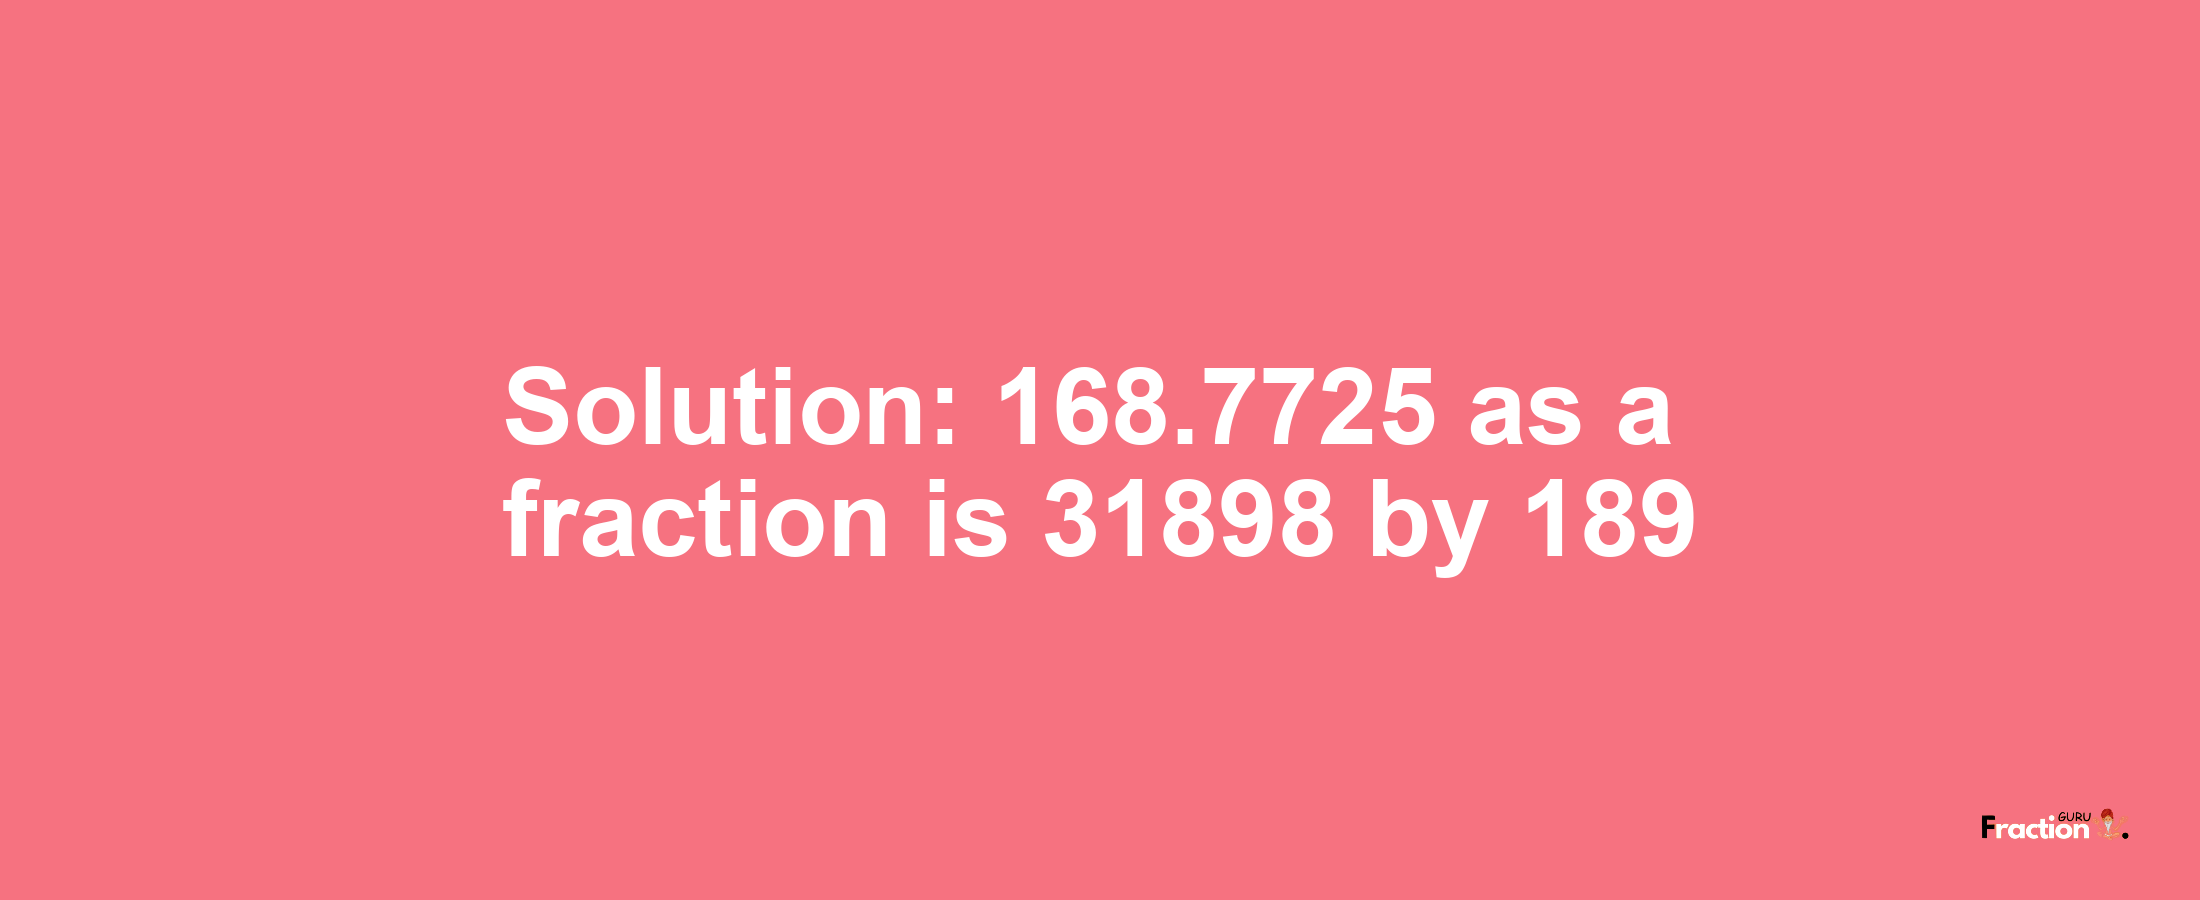 Solution:168.7725 as a fraction is 31898/189